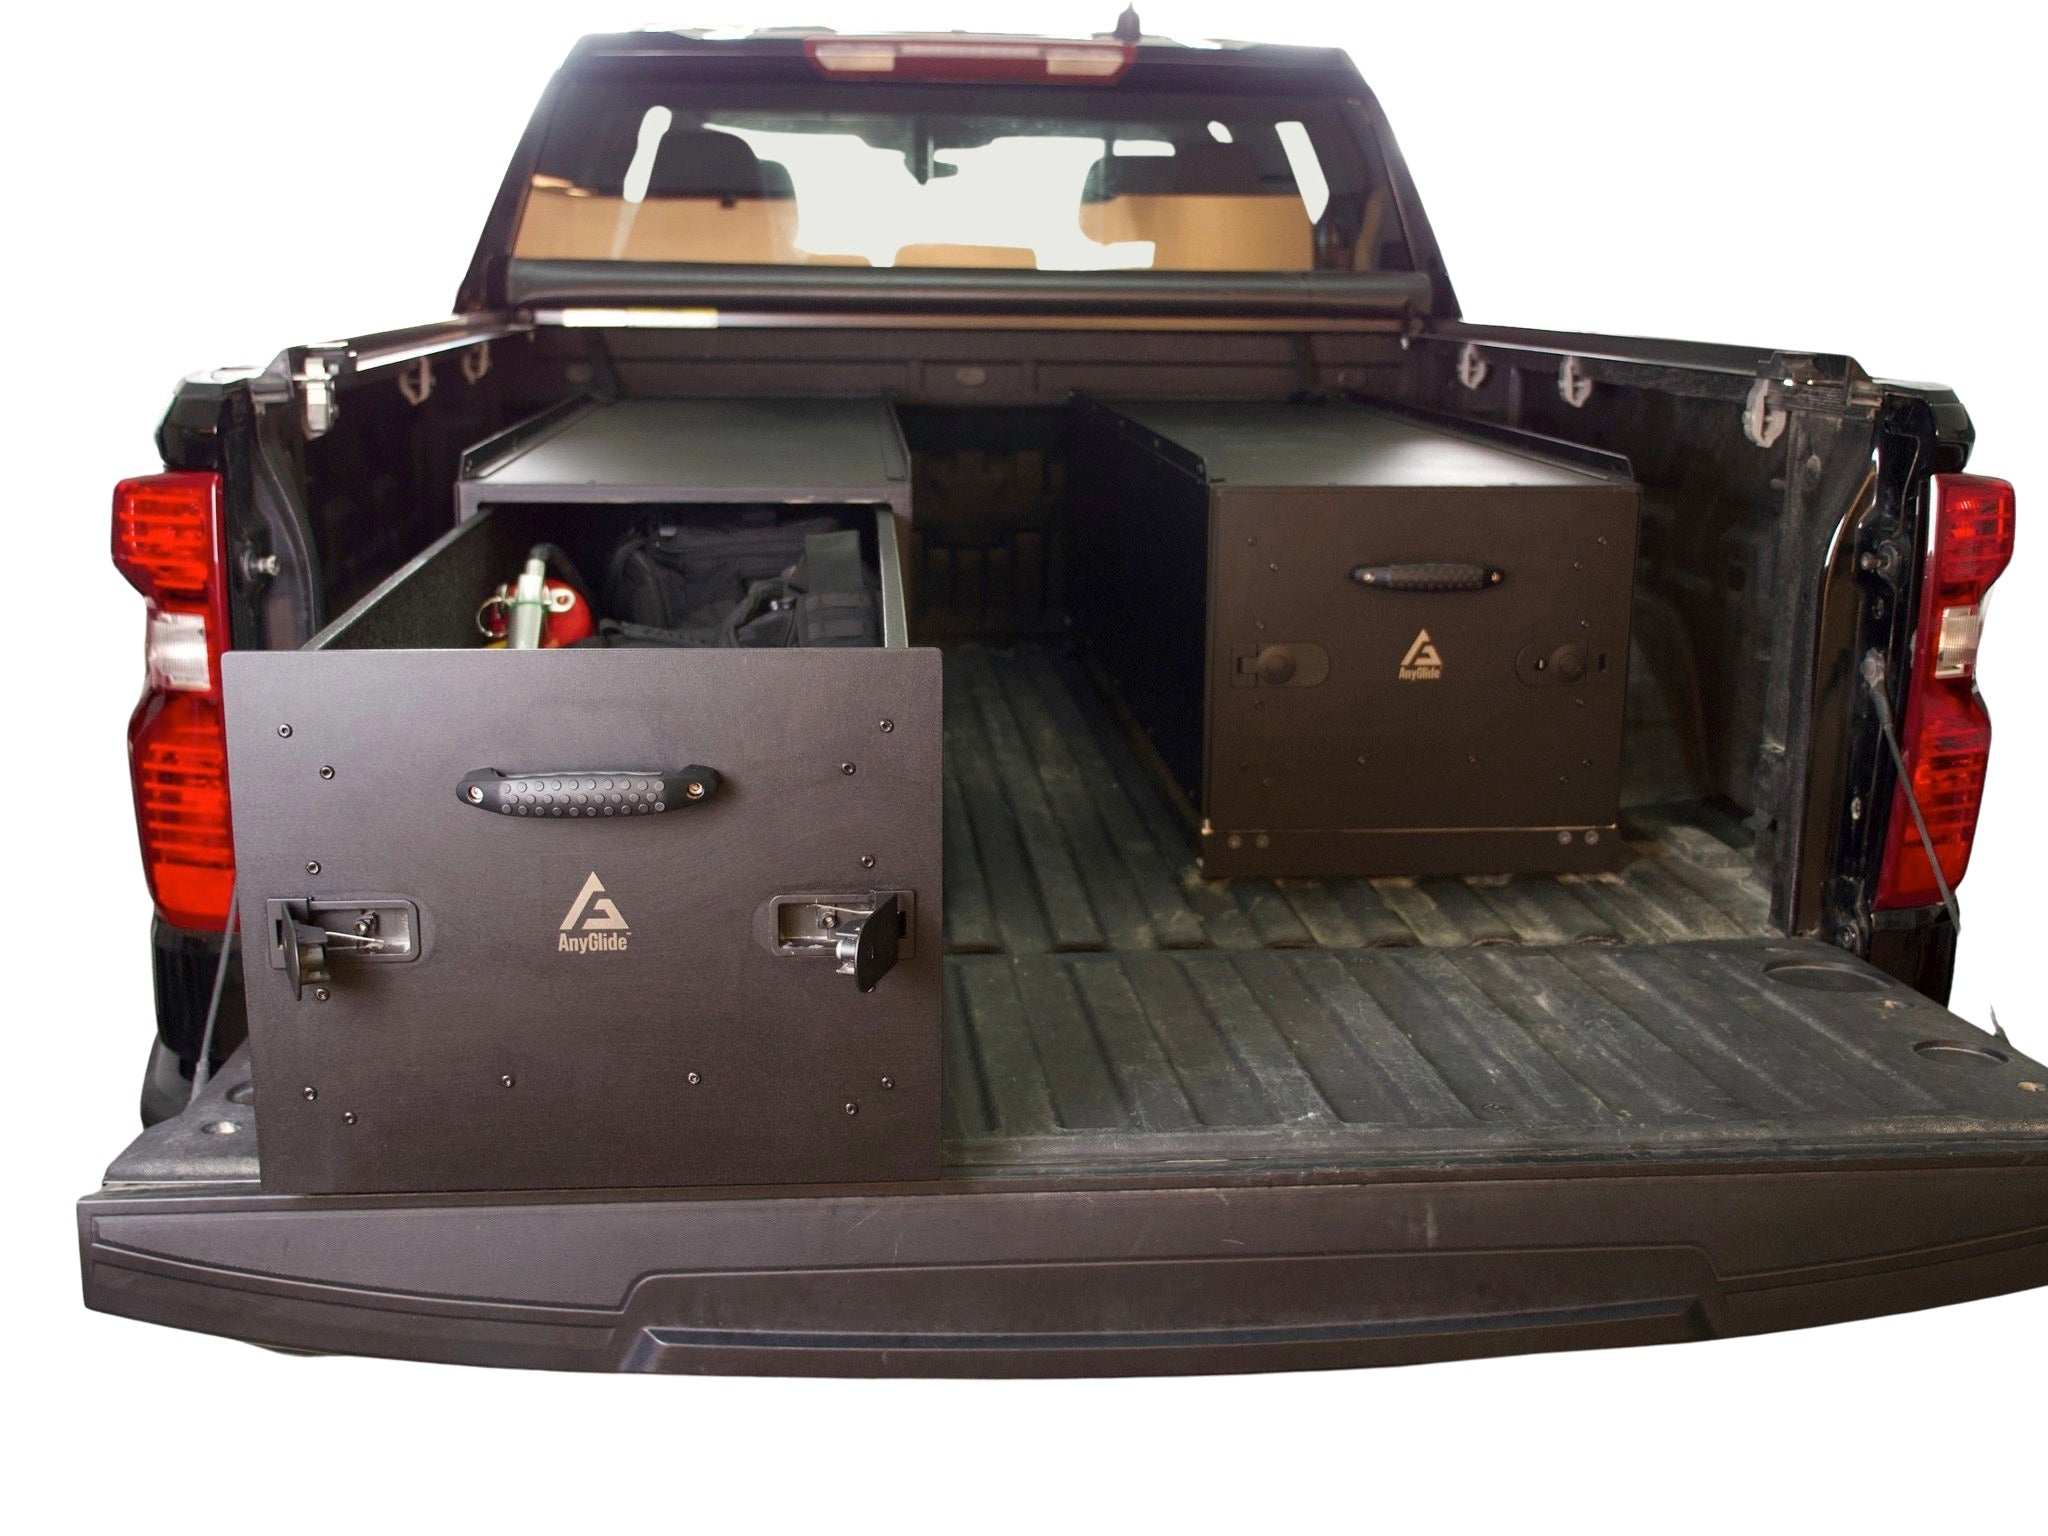 Better Built™  Truck Tool Boxes & Storage Solutions 